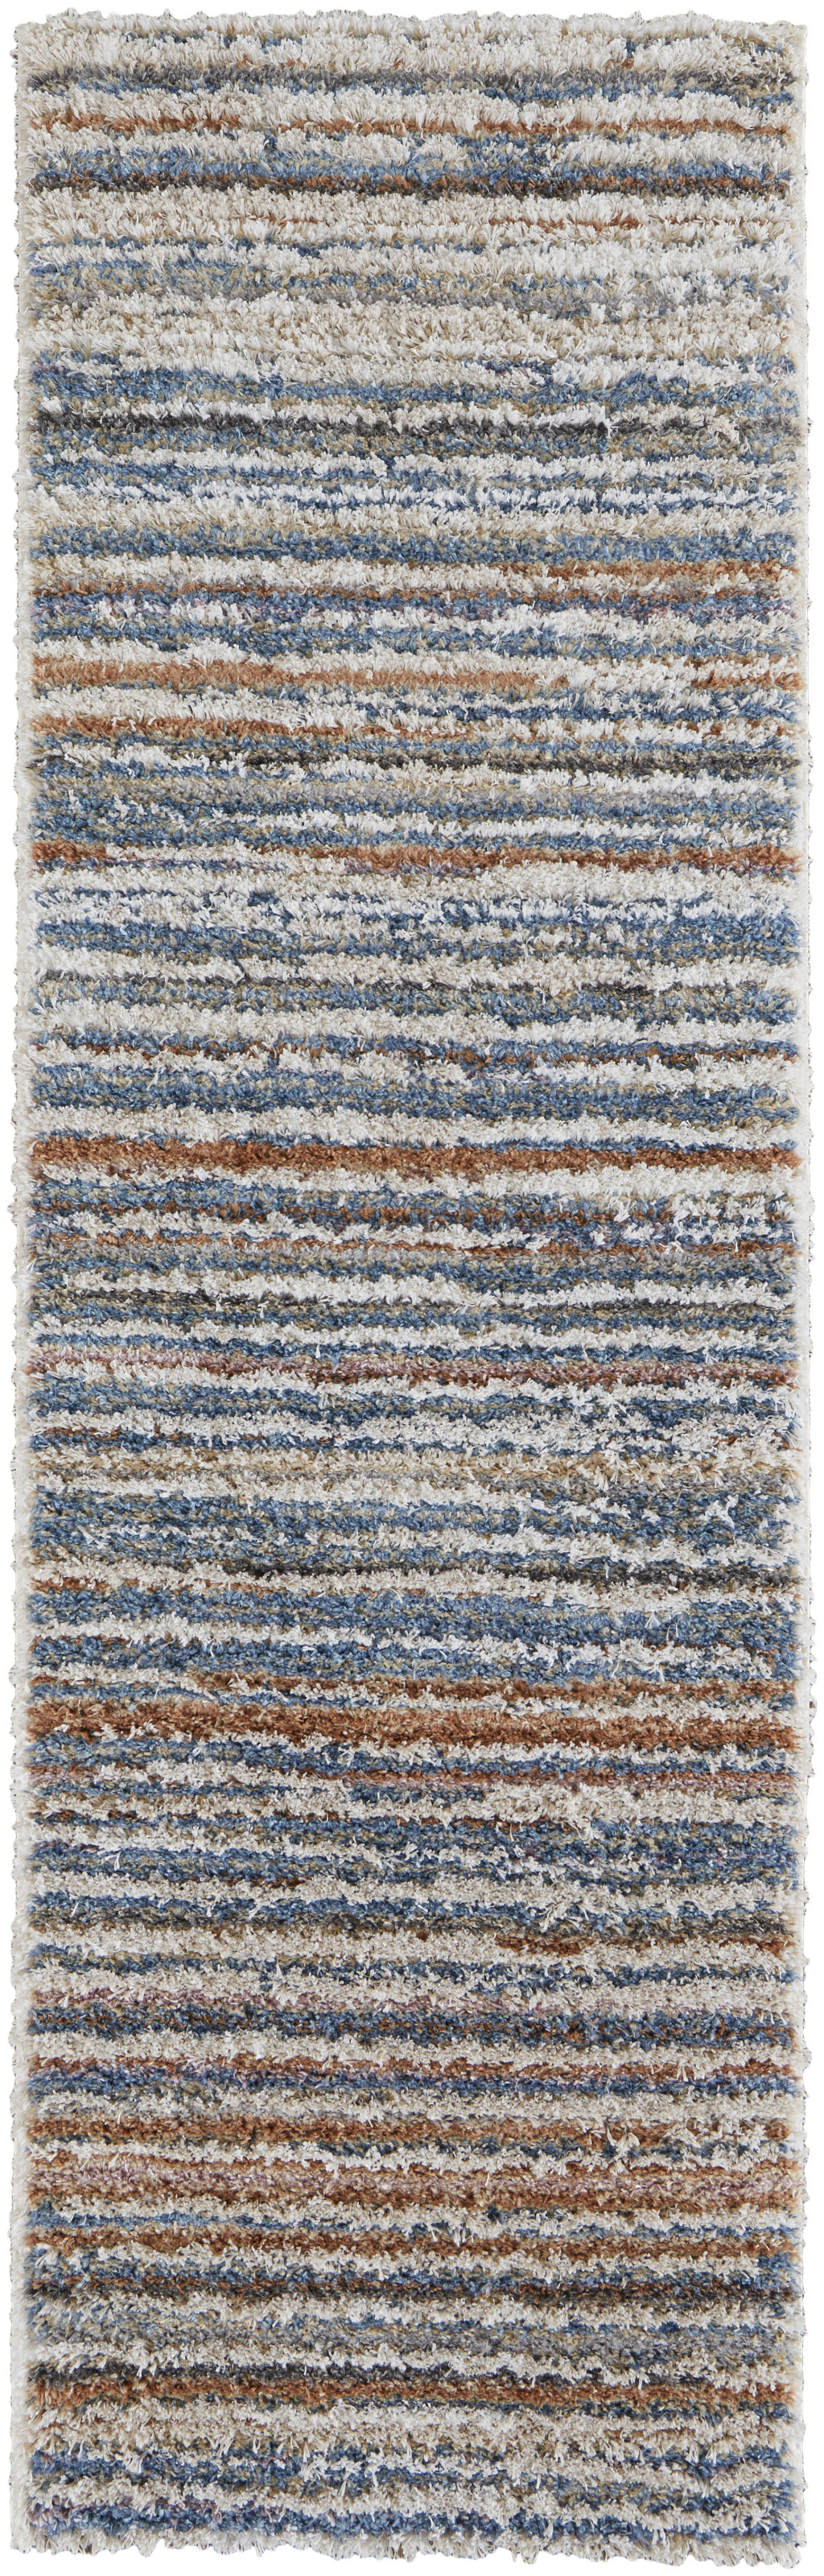 8' Ivory Blue And Orange Striped Power Loom Stain Resistant Runner Rug-514532-1